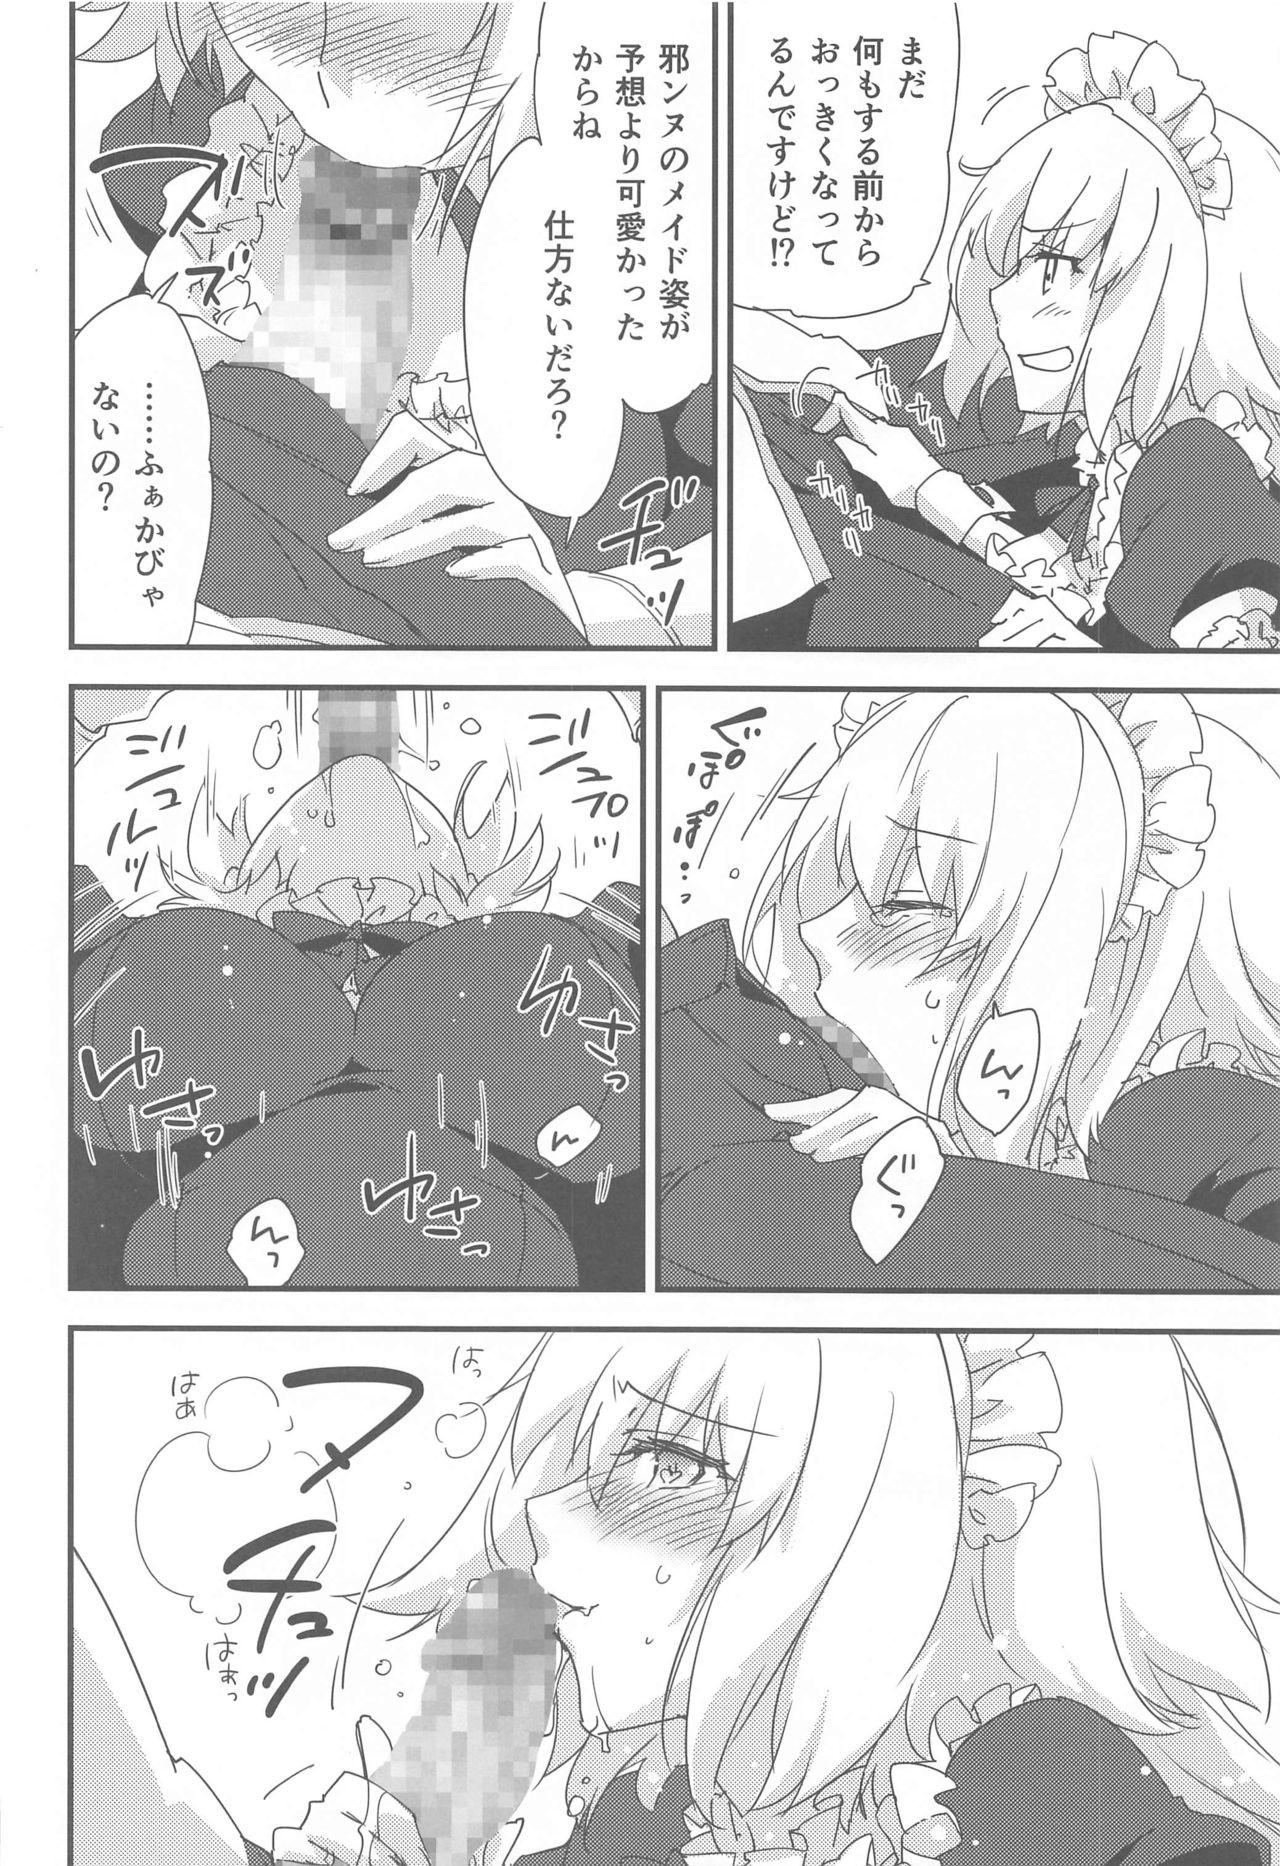 Culo Gohoushi Maid Jeanne-chan - Fate grand order Tanned - Page 9